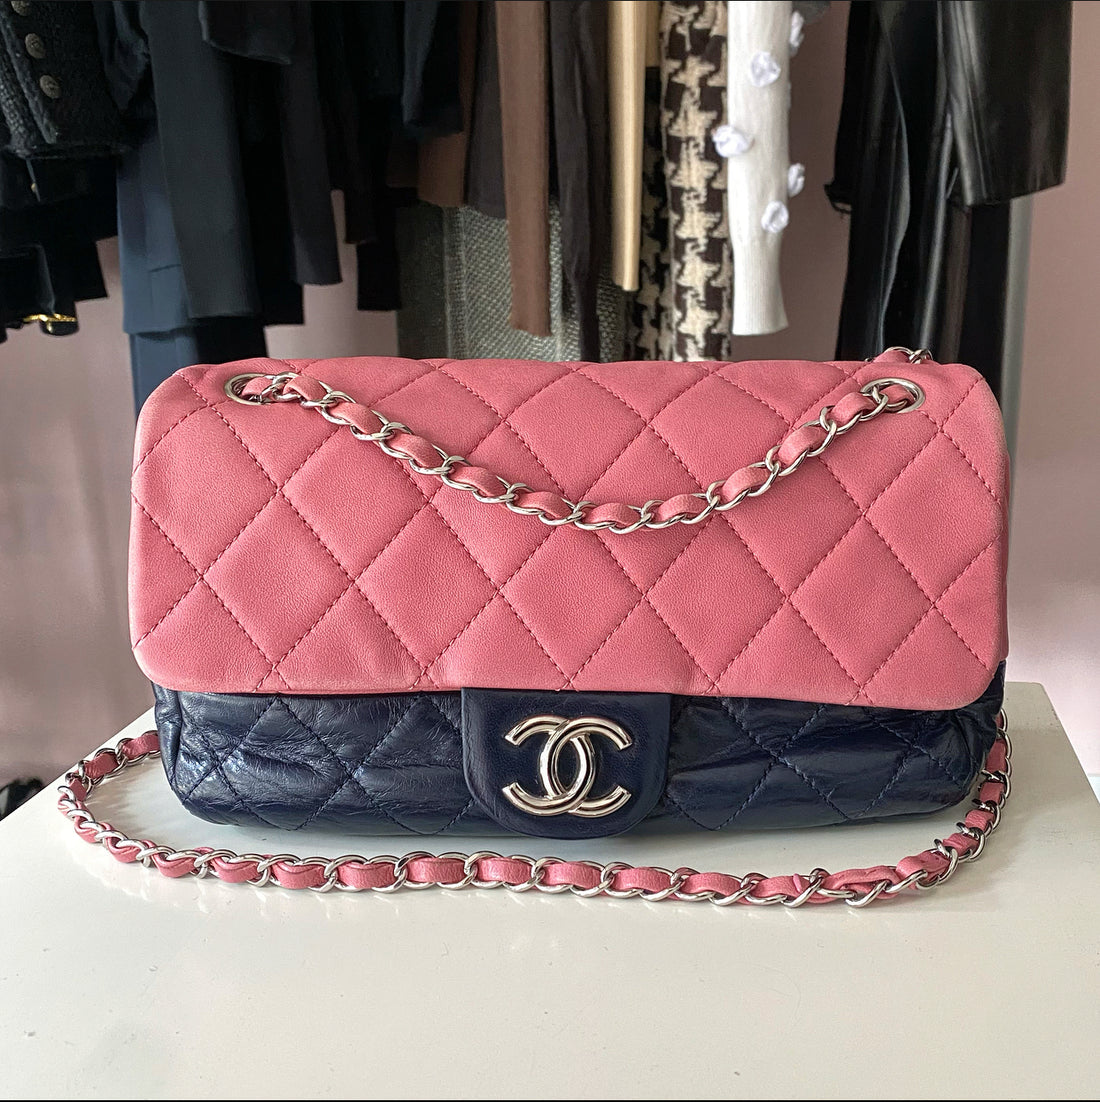 Chanel Pink and Navy Bicolor Quilted Leather Flap Bag – I MISS YOU